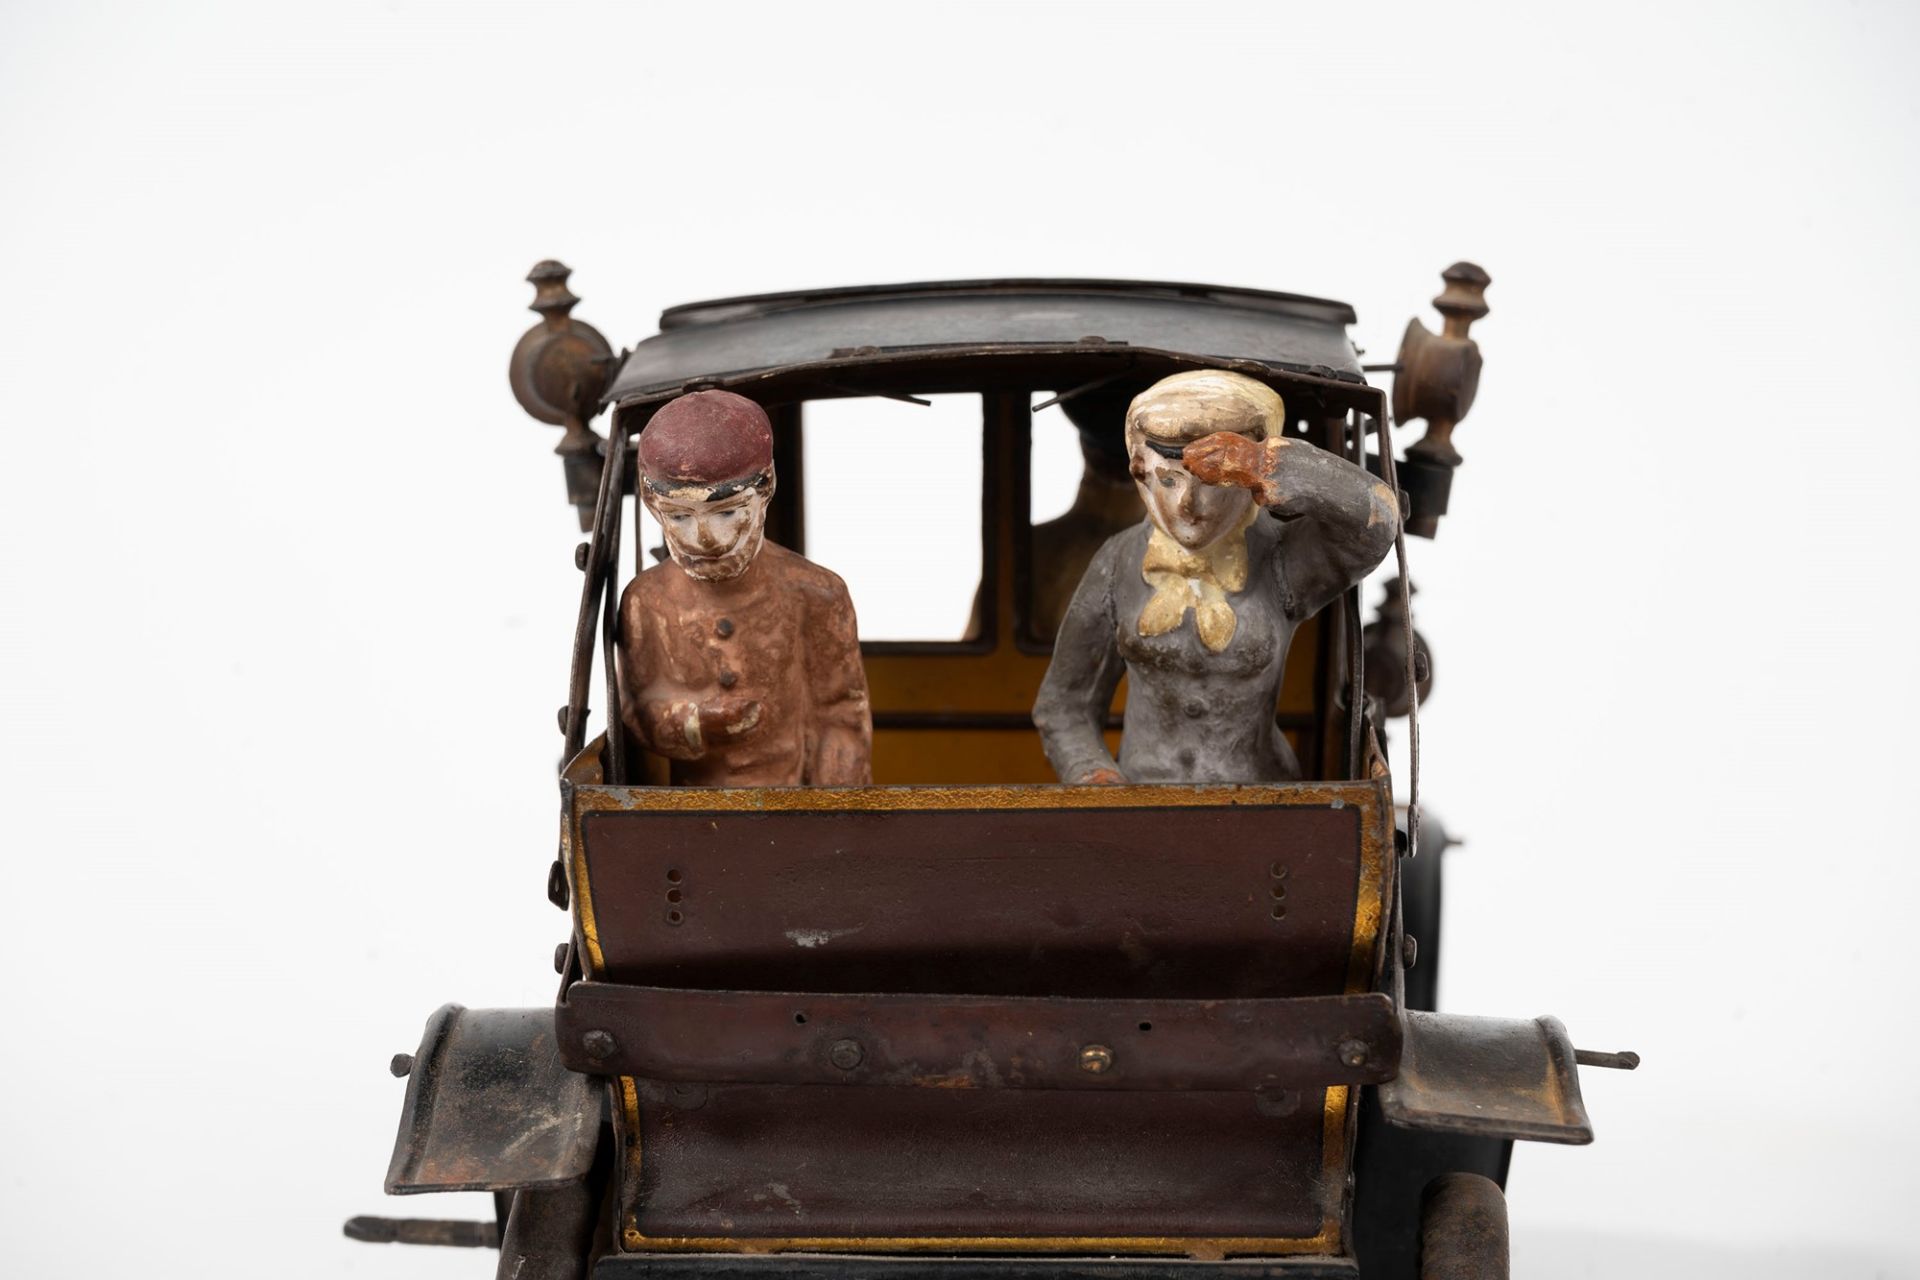 Tin toy car, early 20th century - Image 3 of 4